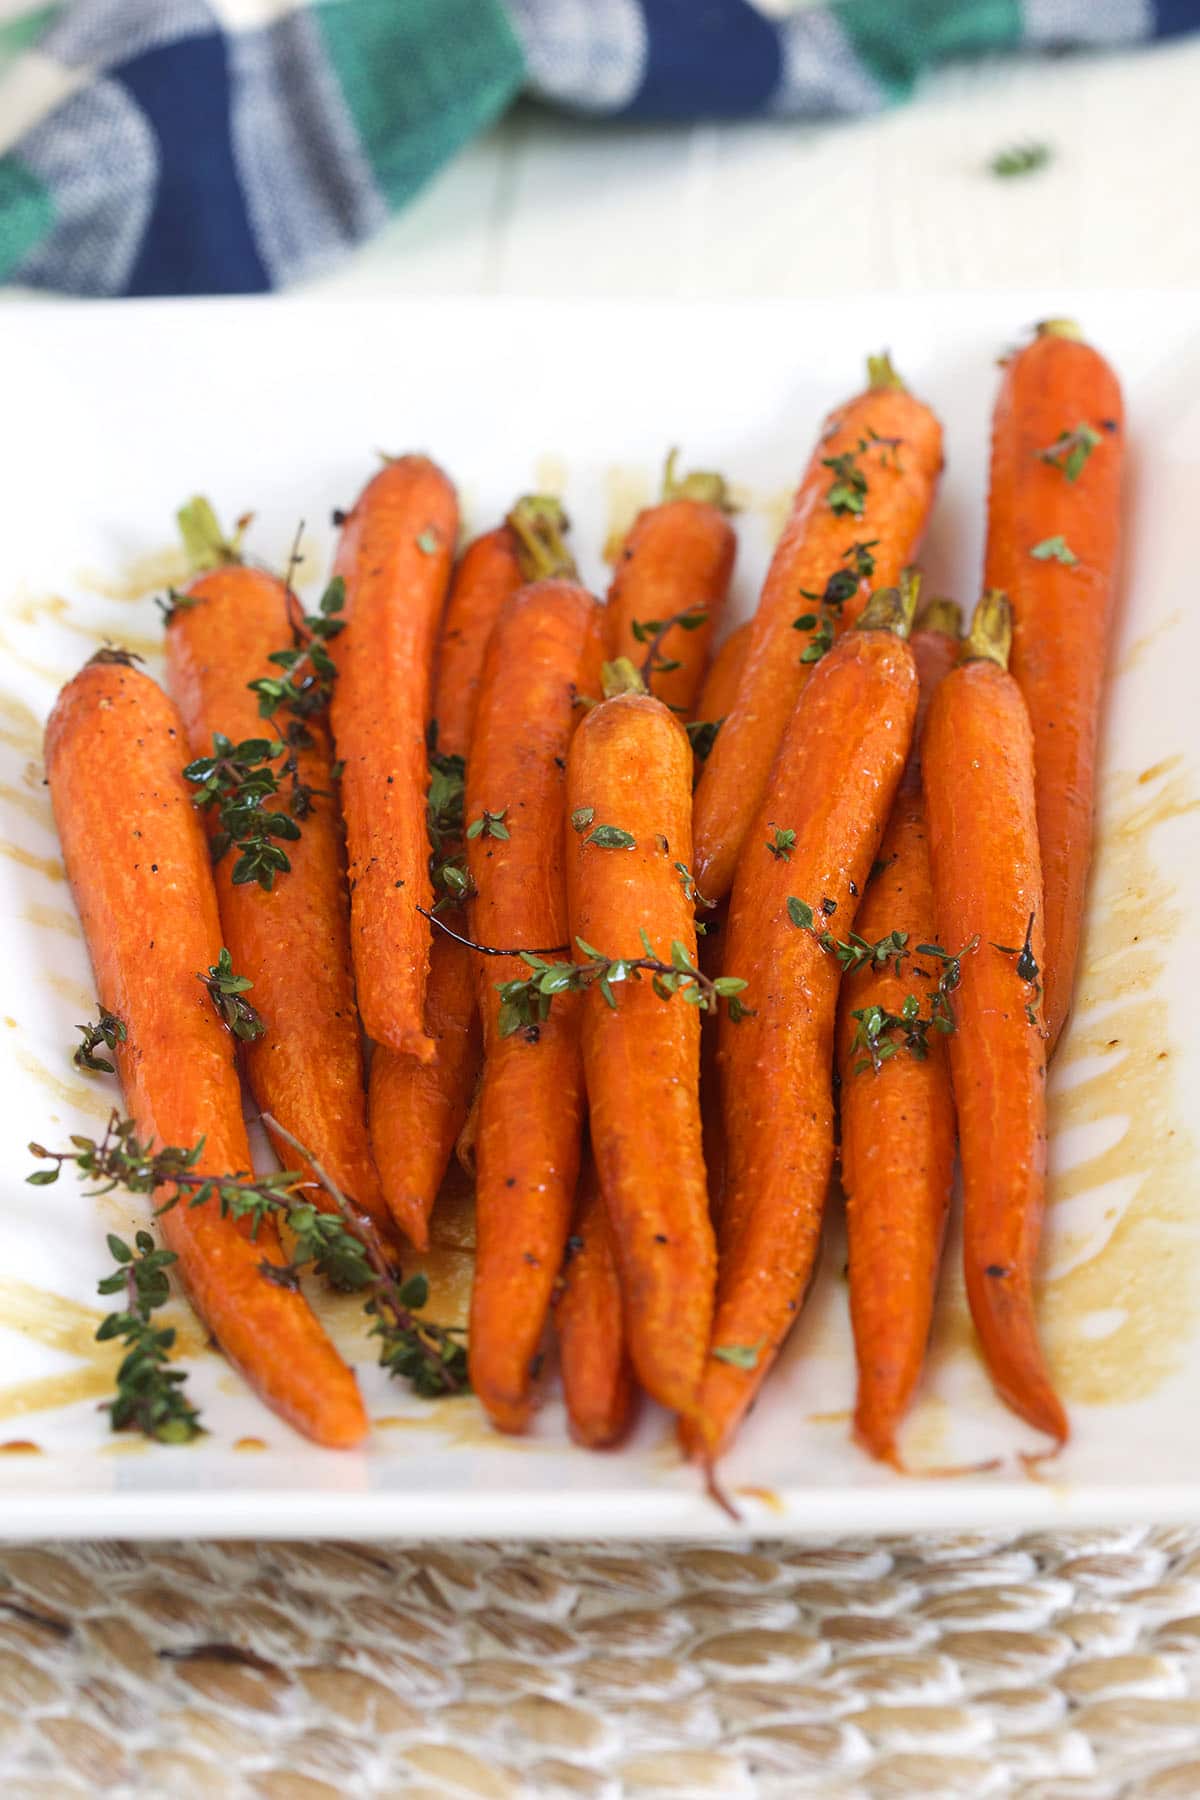 Roasted carrots are topped with fresh thyme.